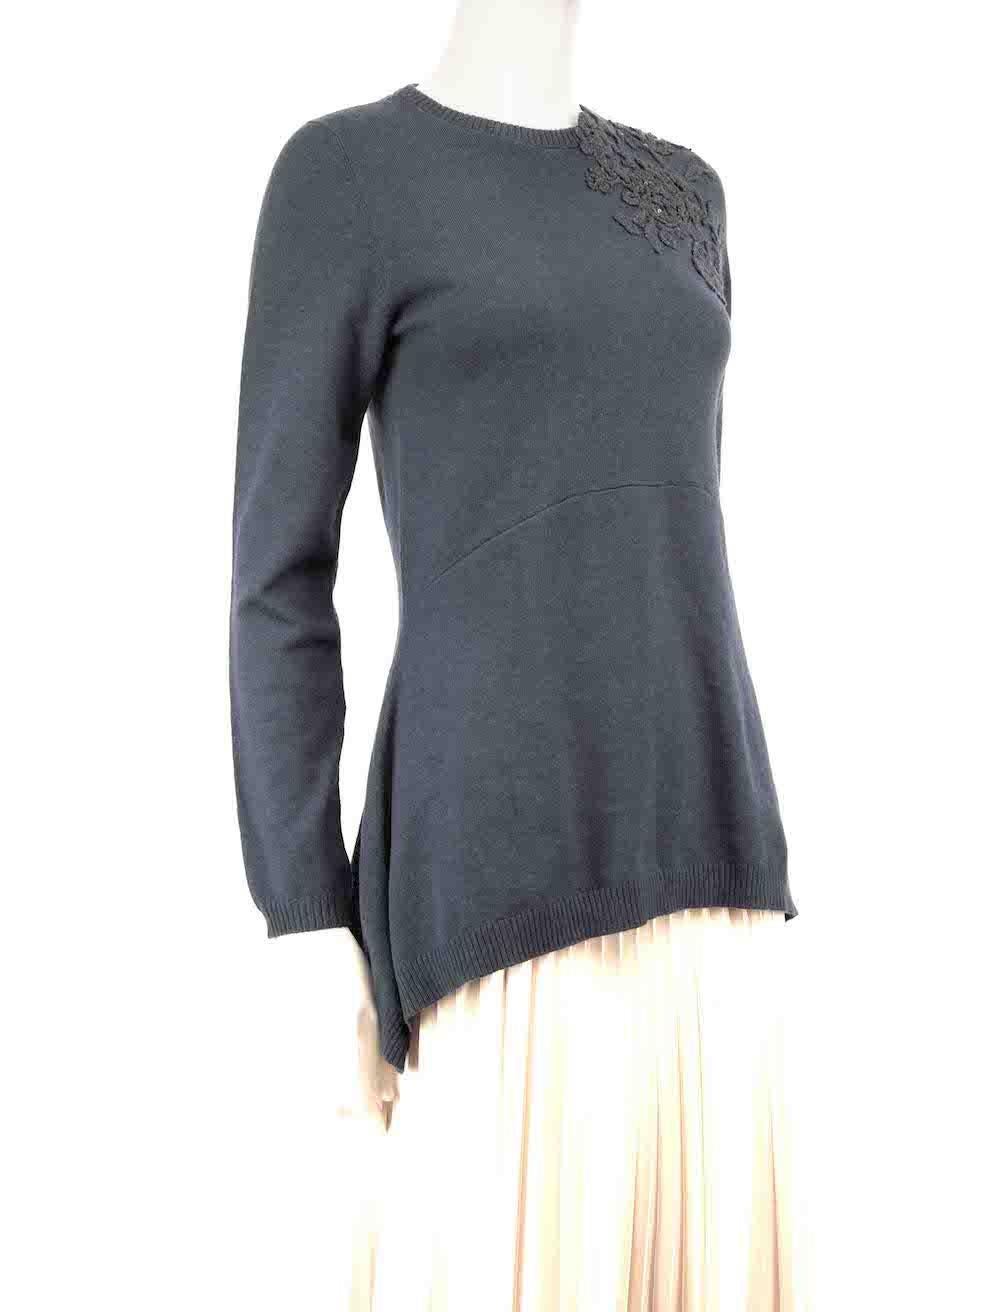 CONDITION is Very good. Hardly any visible wear to jumper is evident on this used Brunello Cucinelli designer resale item.
 
 
 
 Details
 
 
 Blue
 
 Cashmere
 
 Knit jumper
 
 Long sleeves
 
 Round neck
 
 Floral embroidered shoulder
 
 
 
 
 
